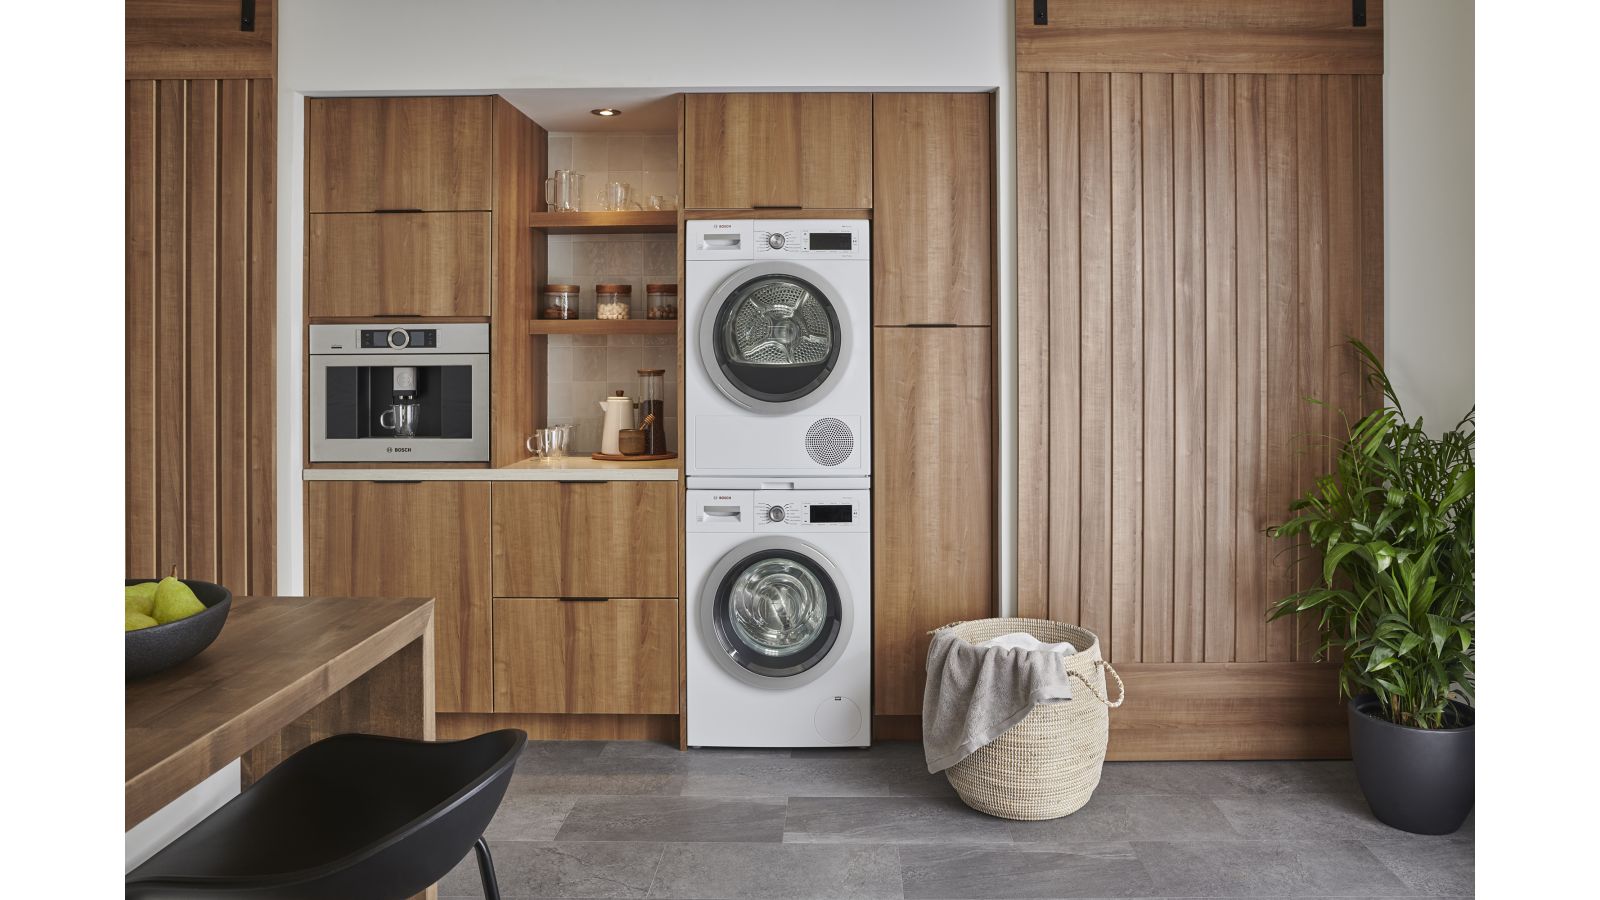 Bosch 500 Series laundry pair with heat pump drying technology